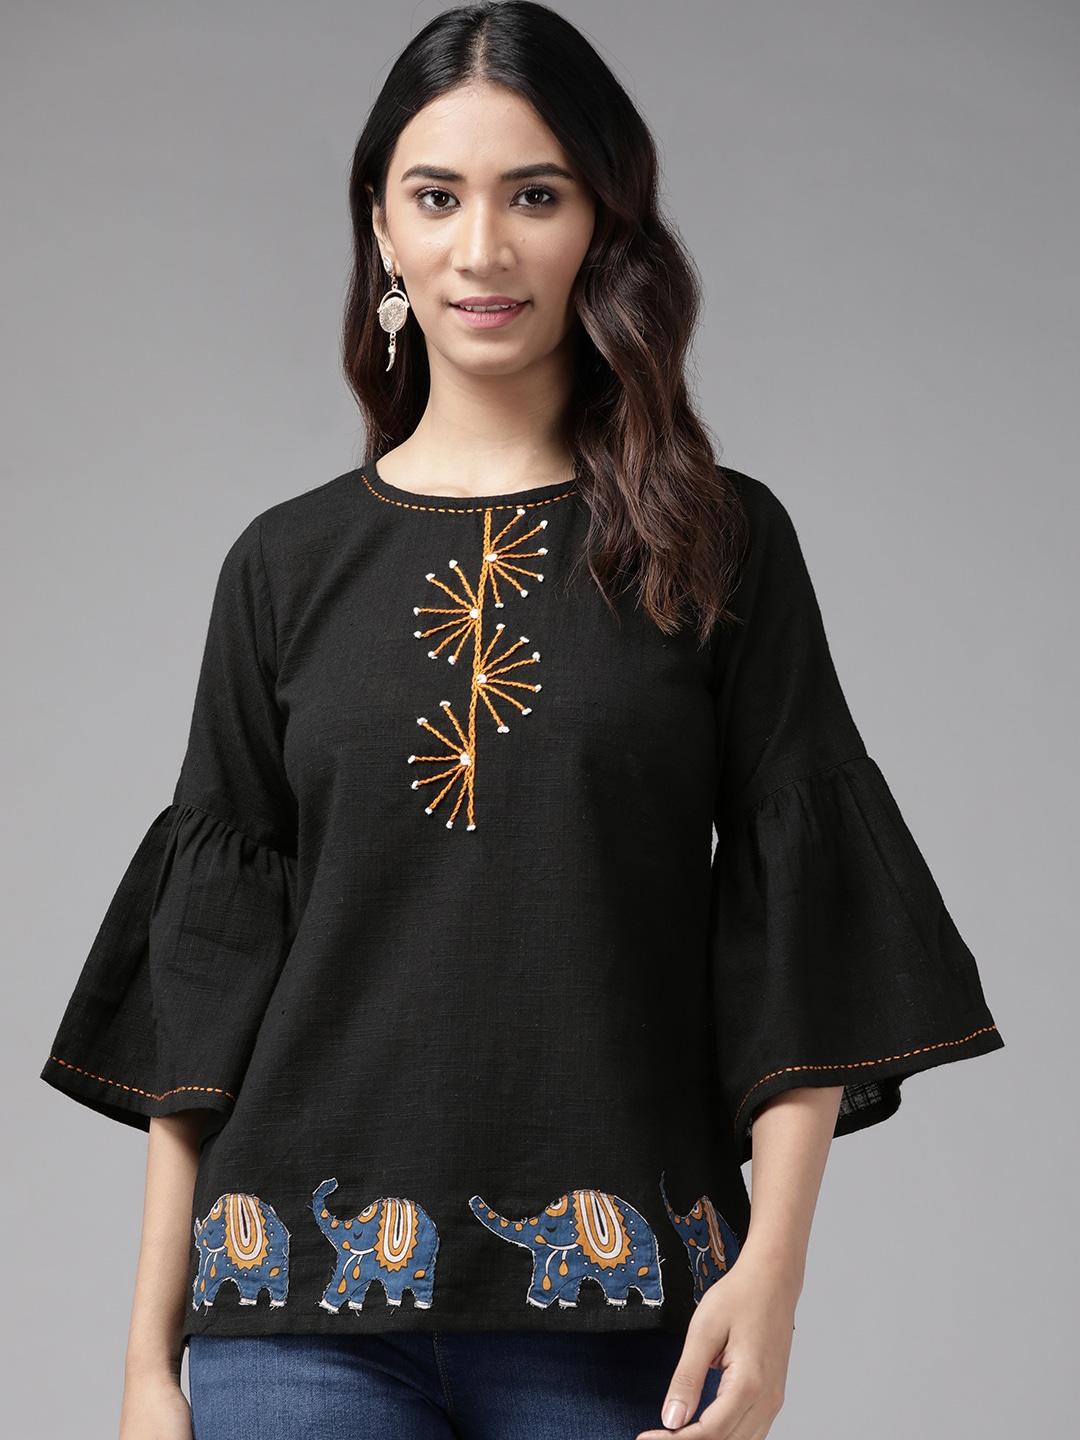 YASH GALLERY Black & Mustard Yellow Embroidered Top With Applique